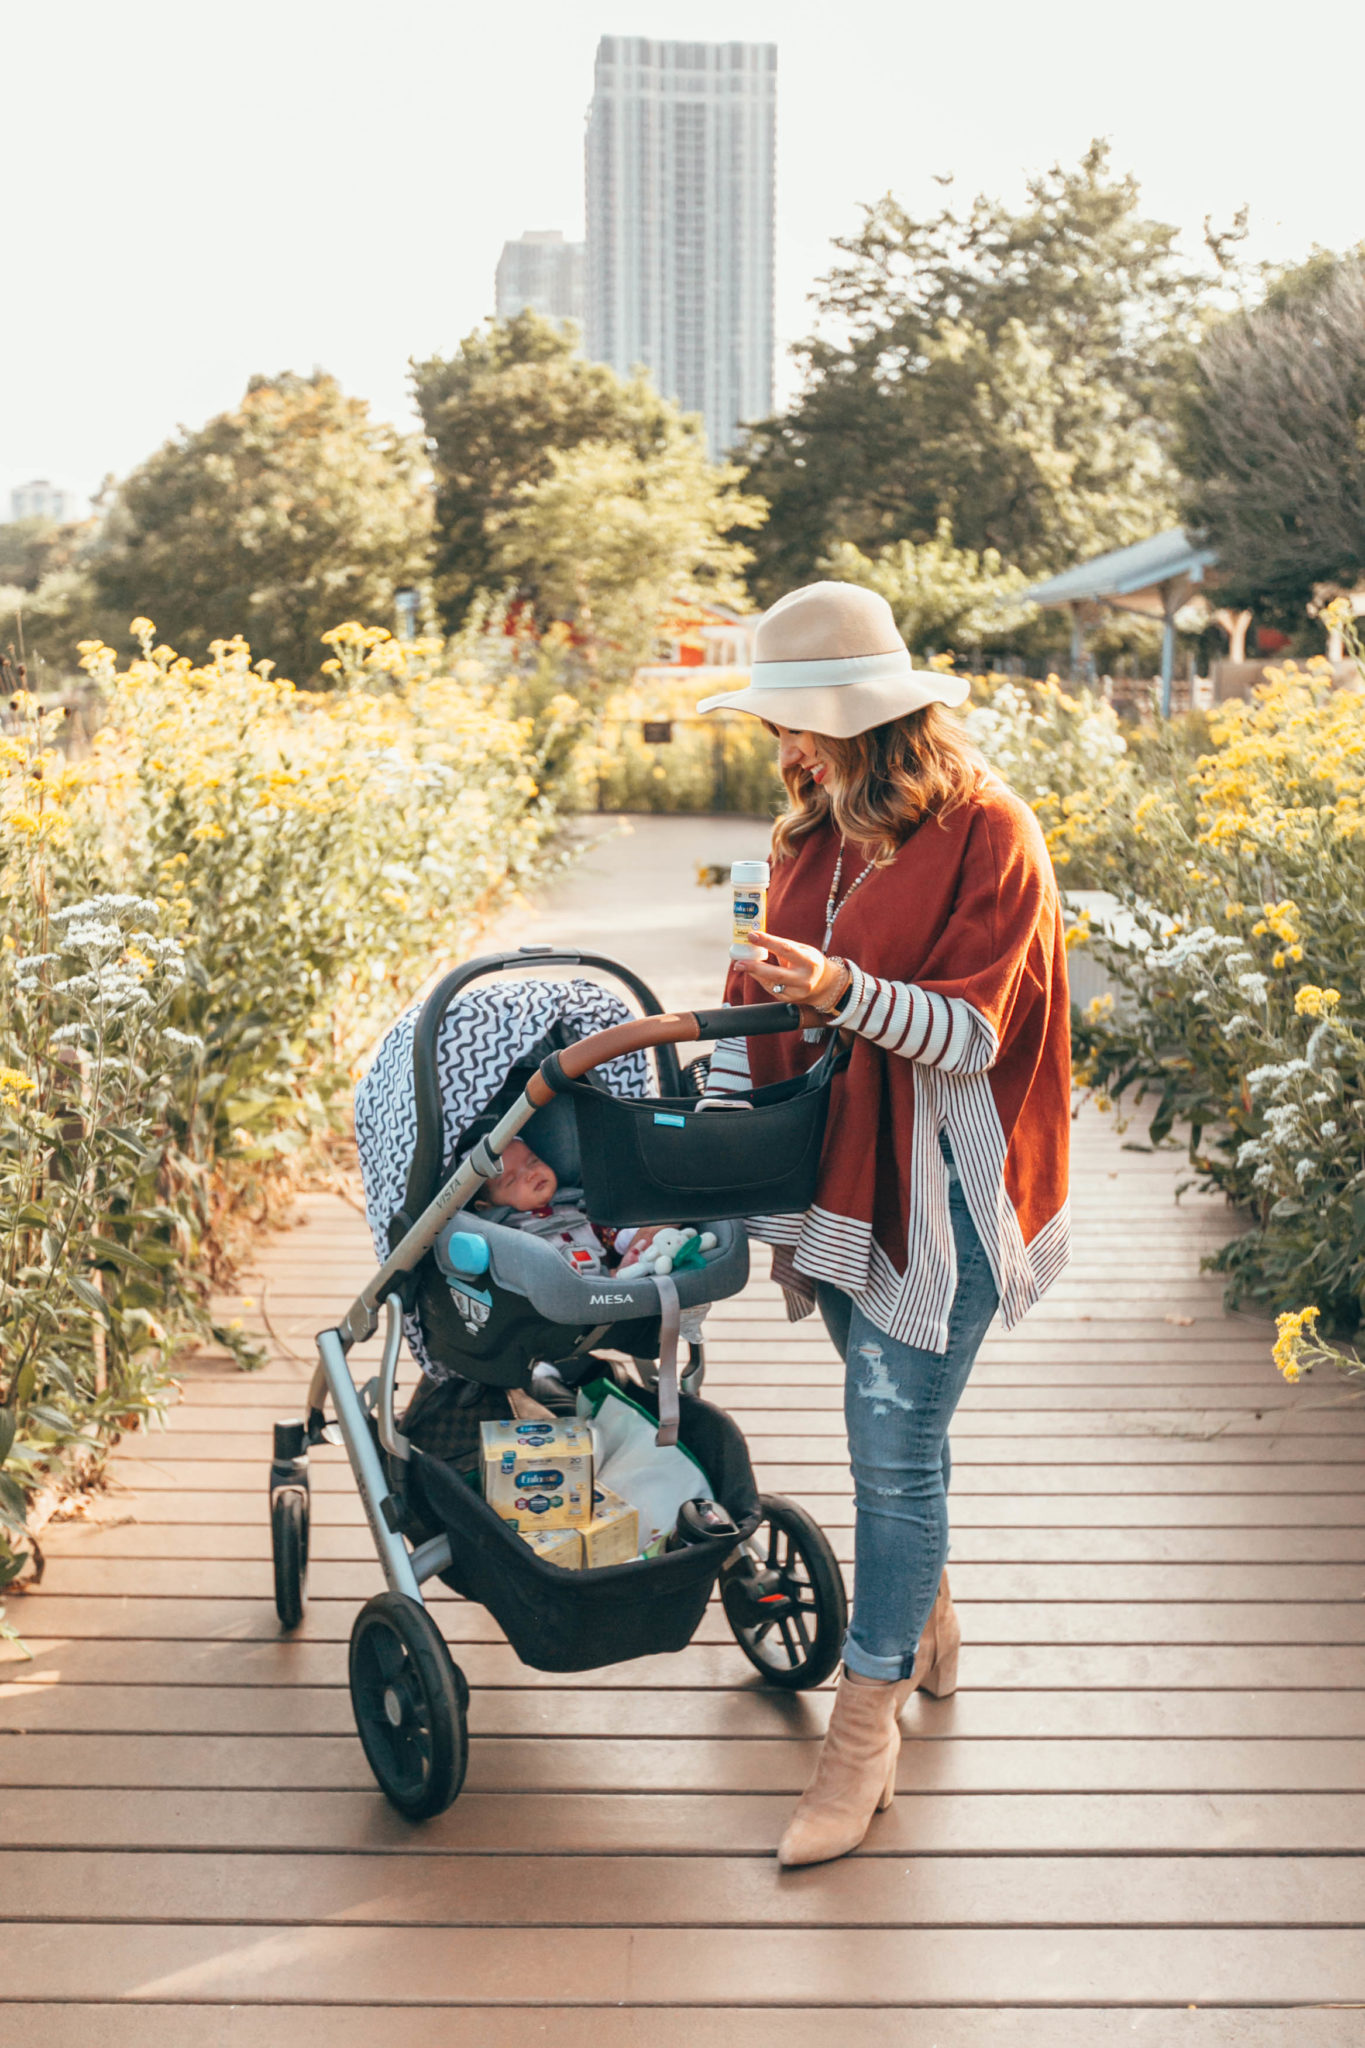 Enfamil NeuroPro Infant Formula Is My Baby Formula Choice by popular Chicago mom blog, Glass of Glam: image of a mom pushing her baby in a stroller outside and holding a bottle of Enfamil NeuroPro Infant Formula. 